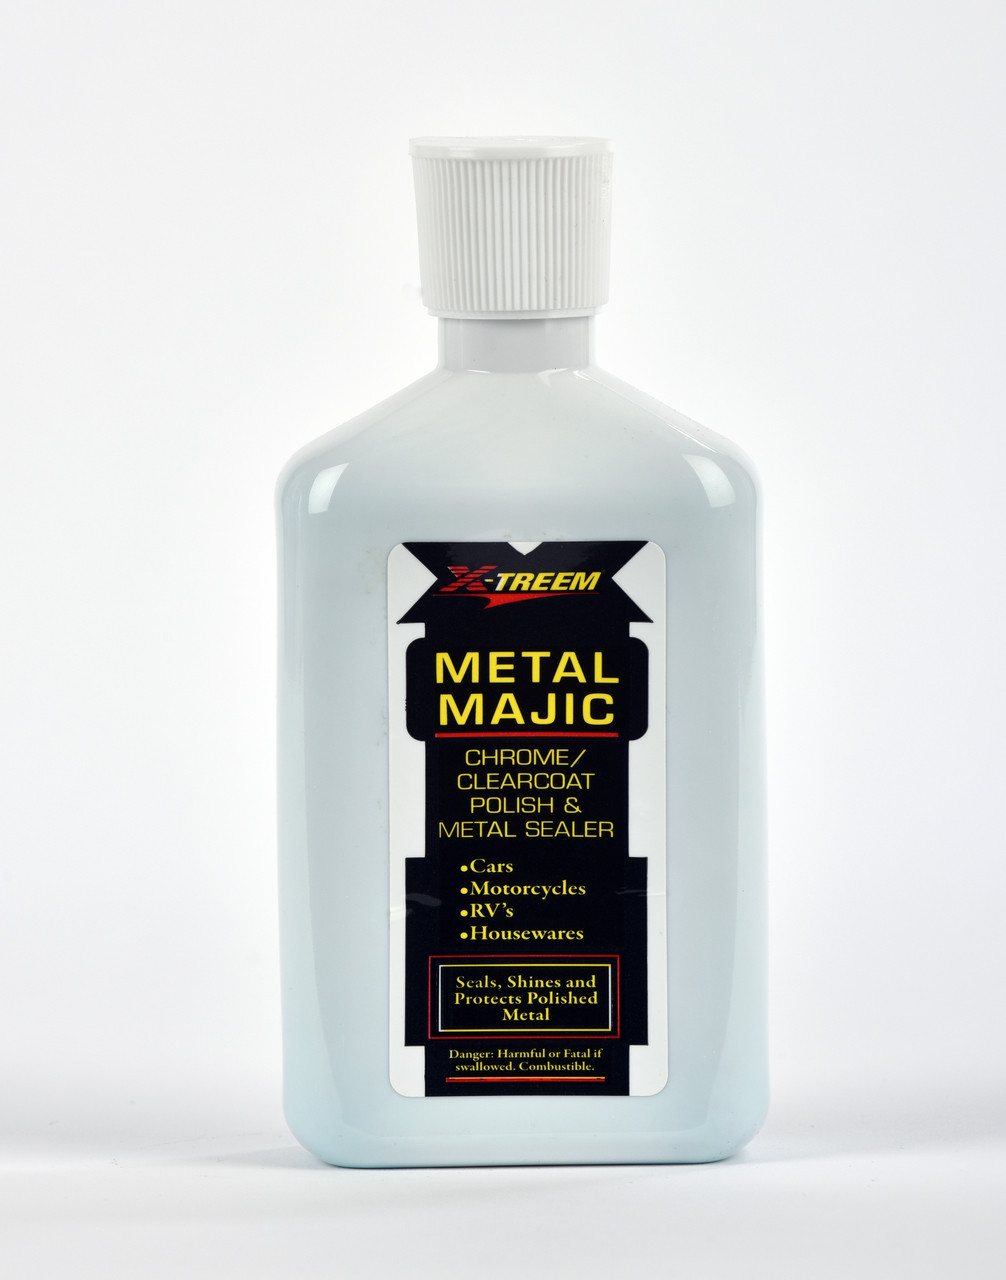 Metal Majic provides the finishing touch on clear coated and painted surfaces. Removes fallout, light surface contamination and water spots while restoring gloss. It will even remove metallic brake dust that bonds to your painted, clear coated or chrome wheels!